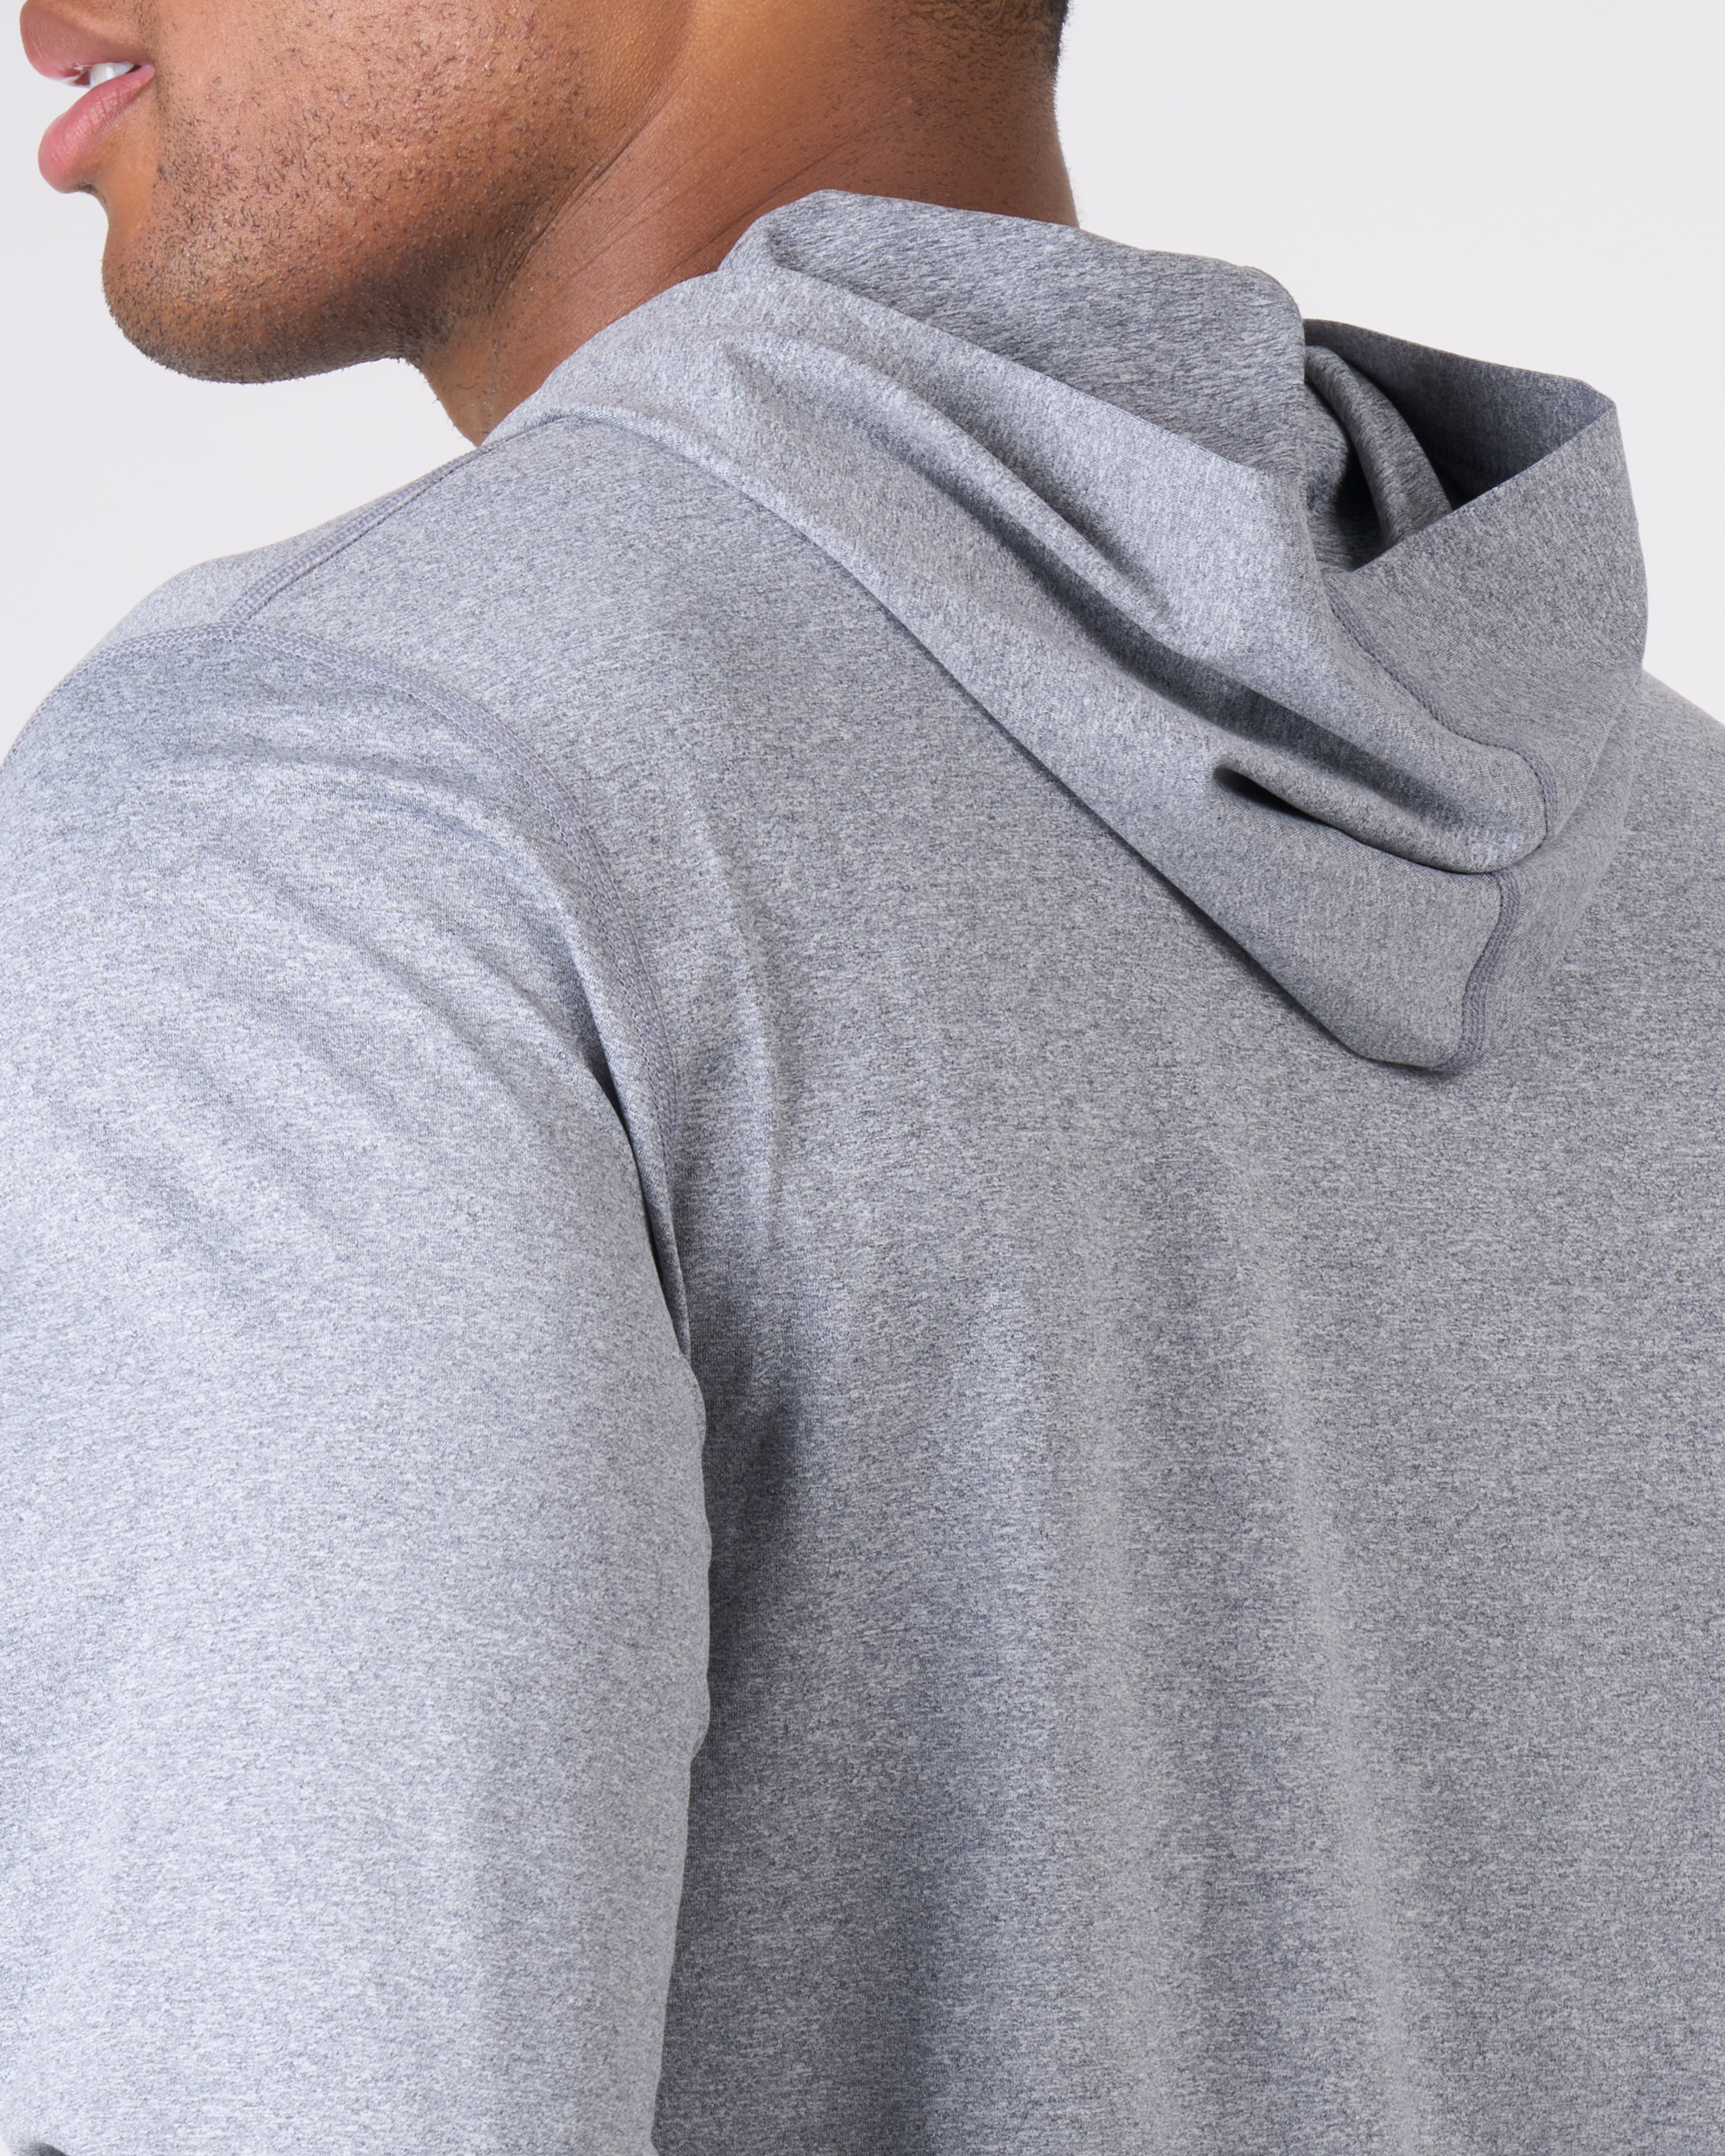 Foreign Rider Co Technical Fabric Grey Long-Sleeve Hooded T-Shirt Shoulder Hood Detail